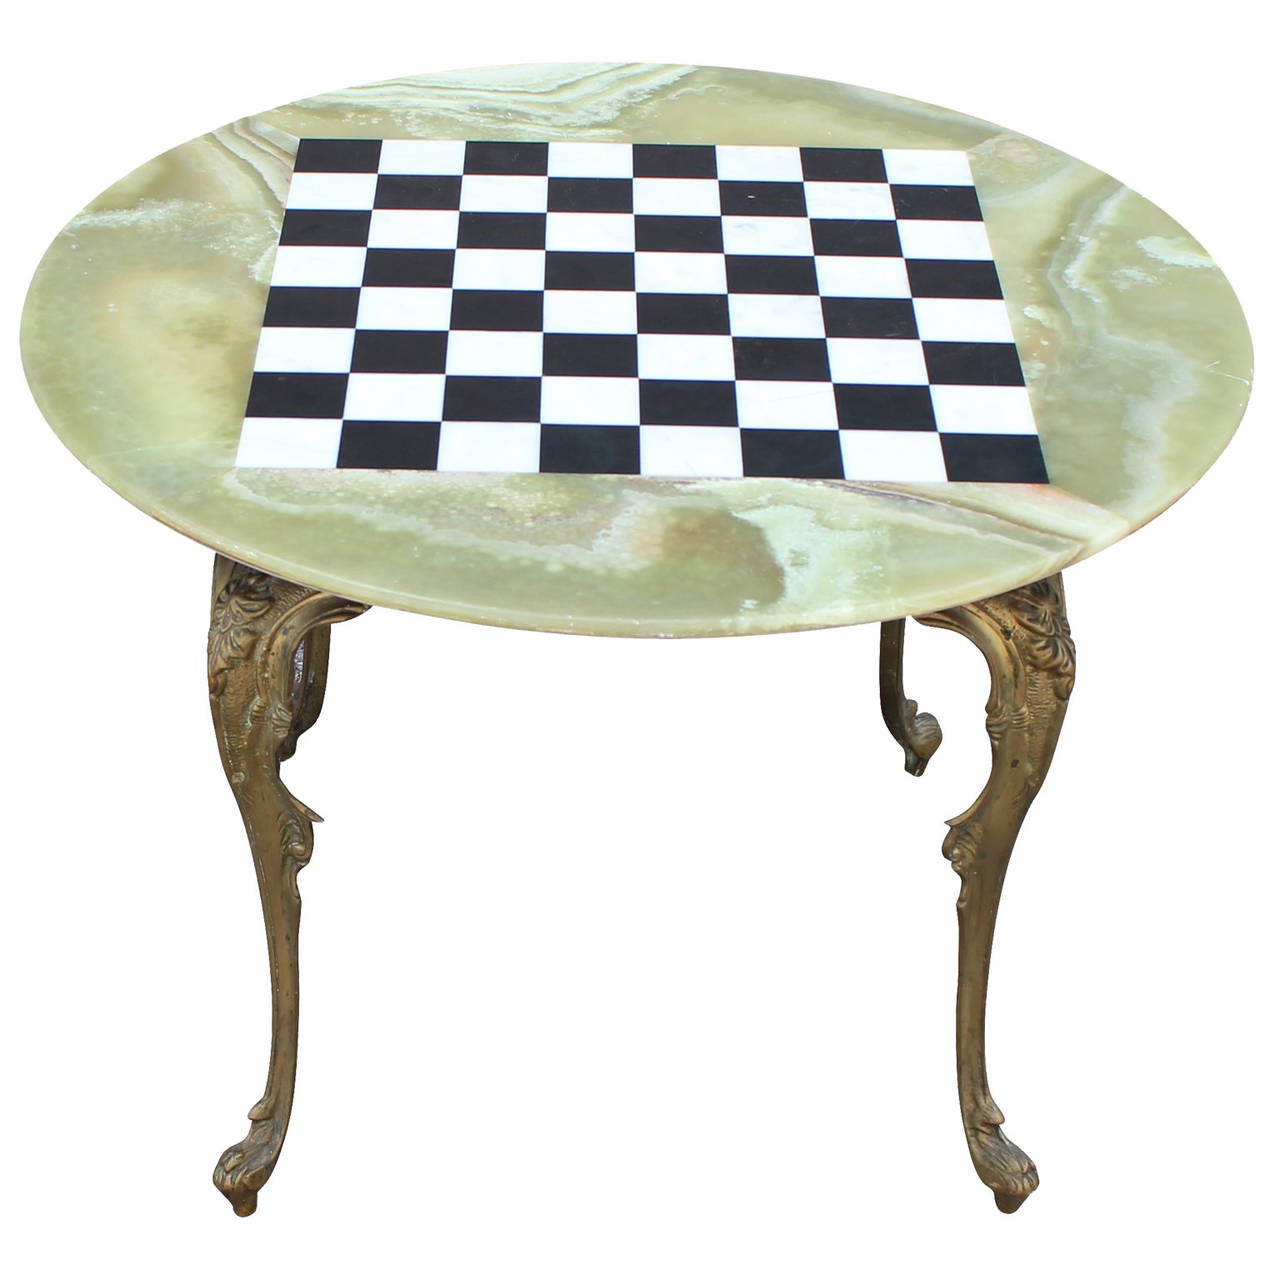 Lovely small onyx and brass game table. Could be used in between two chairs. In excellent vintage condition.